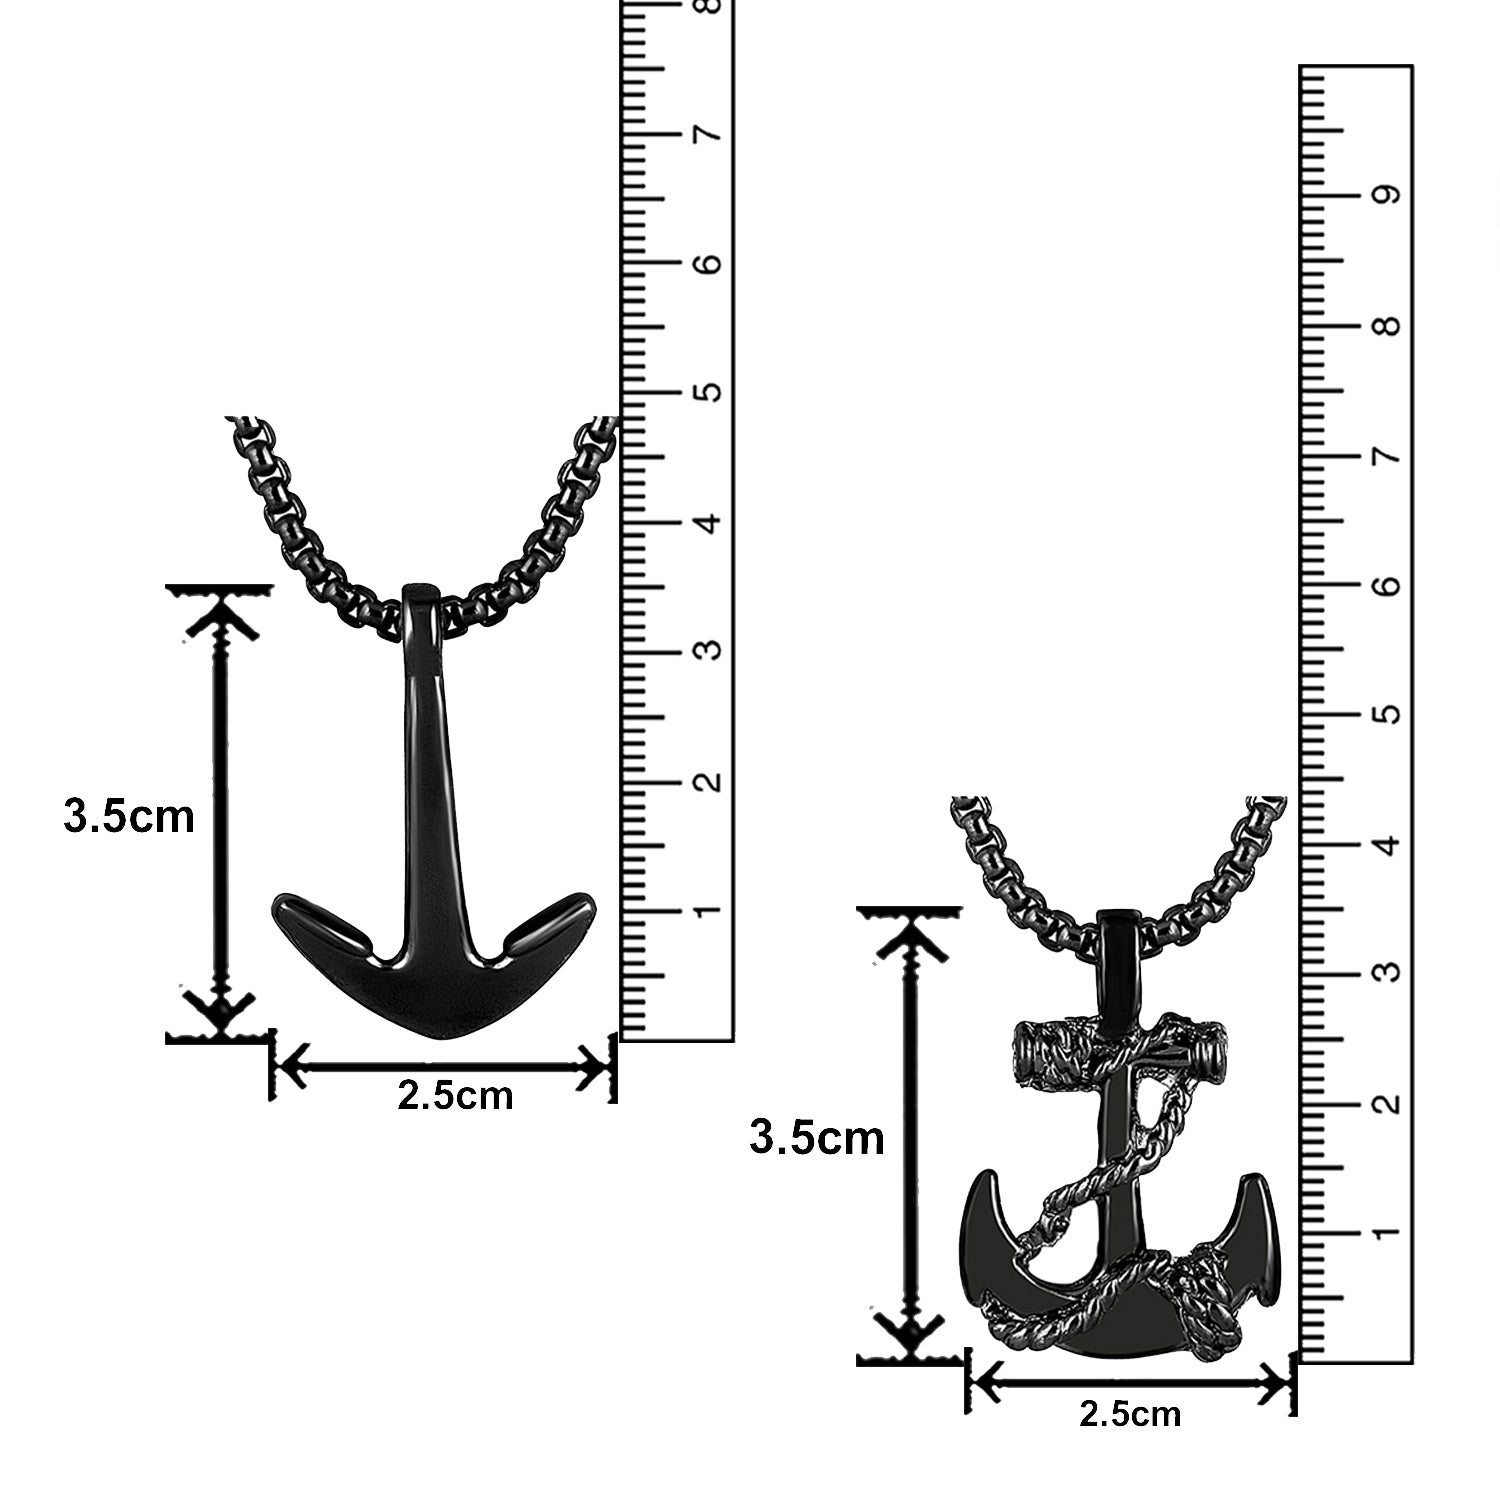 Combo of Black Gun Metal Plated Unisex Ship Anchor Necklace Chain Pendant